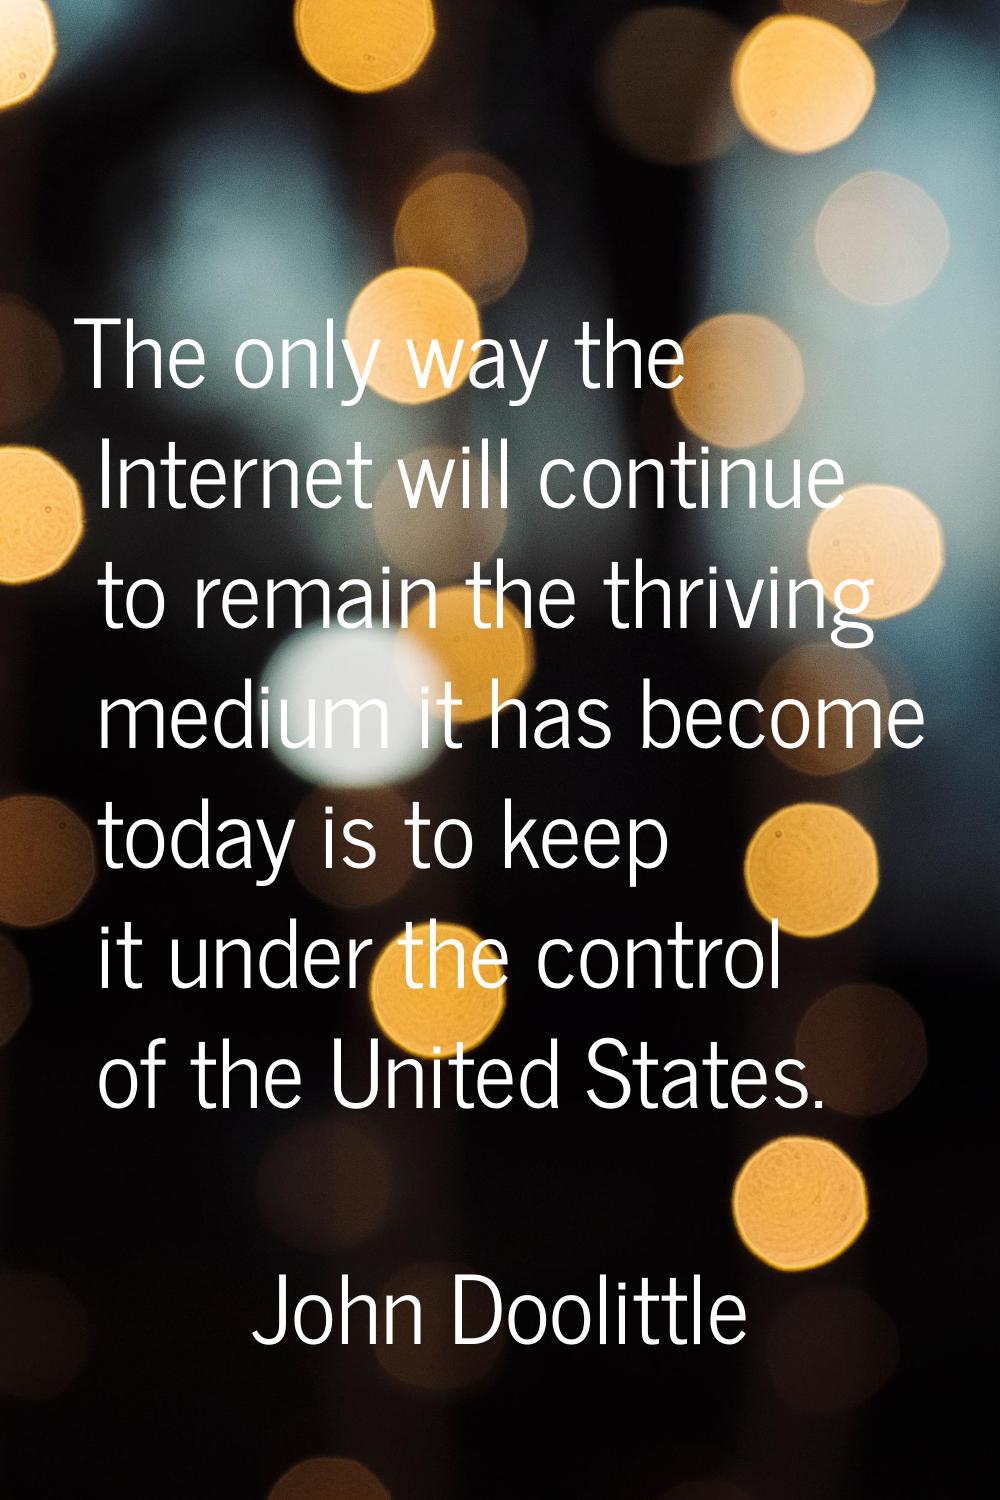 The only way the Internet will continue to remain the thriving medium it has become today is to kee